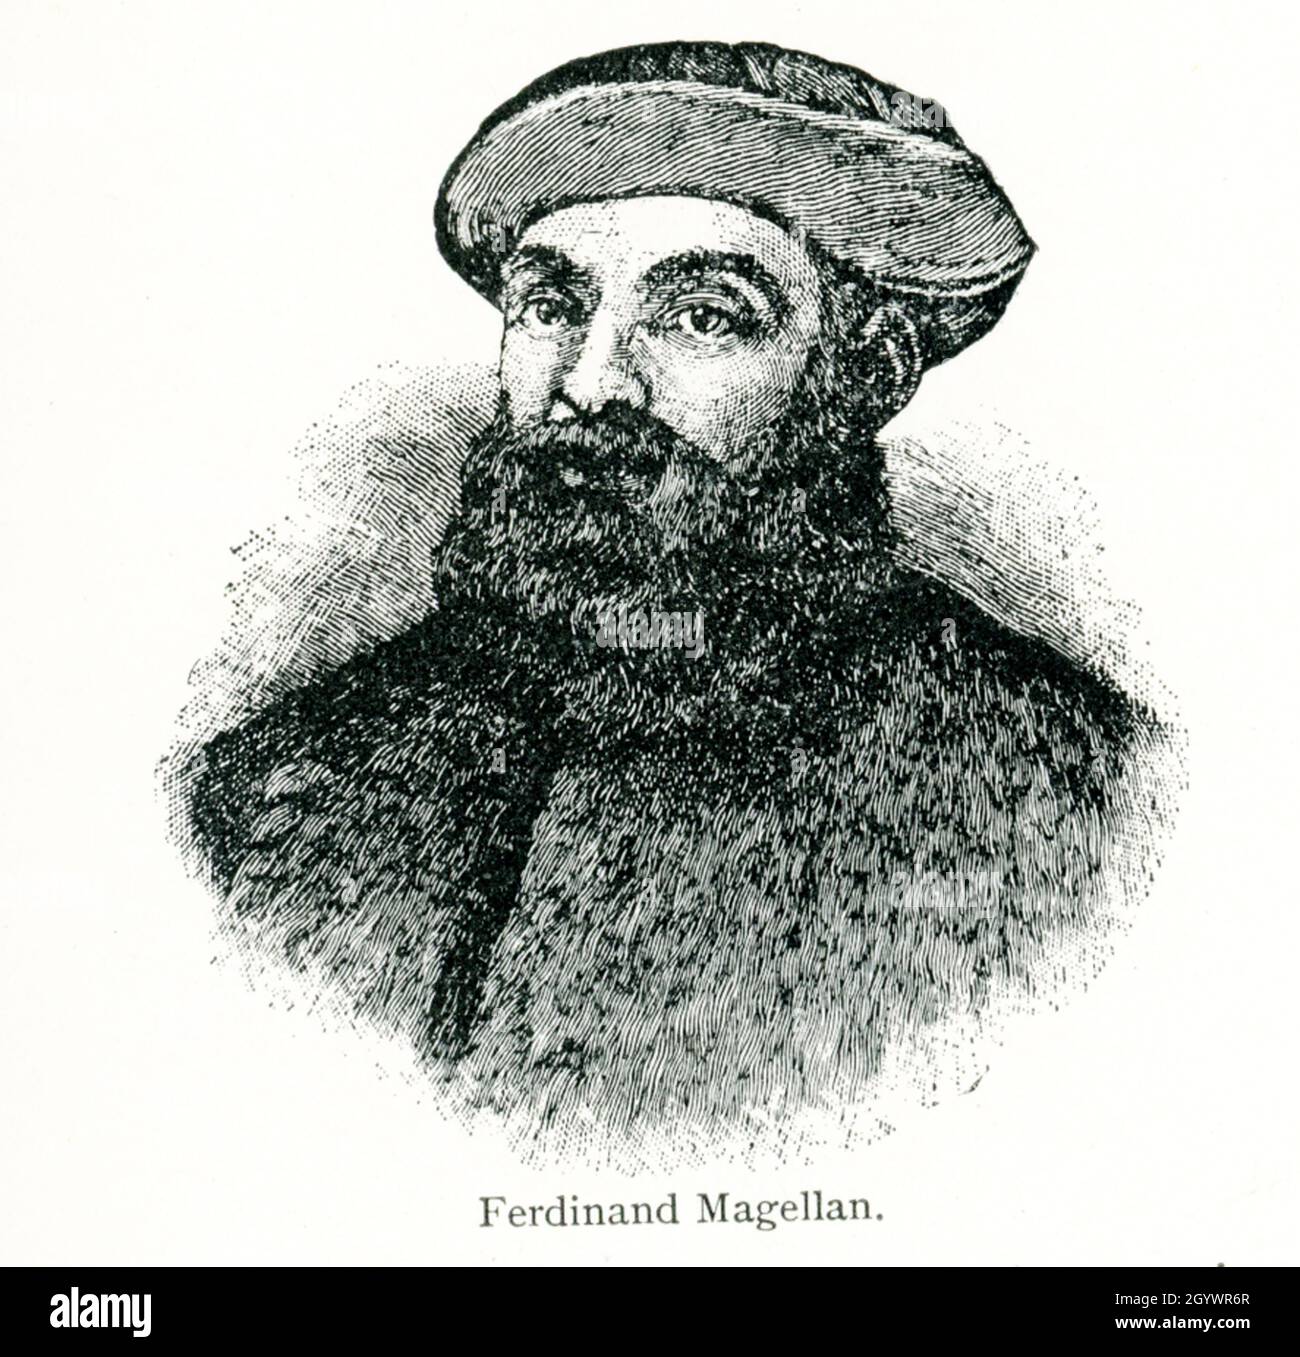 This illustration dates to 1902. Ferdinand Magellan was a Portuguese explorer who organized the Spanish expedition to the East Indies from 1519 to 1522, resulting in the first circumnavigation of the Earth, completed by Juan Sebastián Elcano. Magallanes y La Antarctica Chilena is the largest and southernmost region of Chile. Named for  Magellan, the Portuguese navigator, it became a colonial territory in 1853 and a province in 1929. Stock Photo